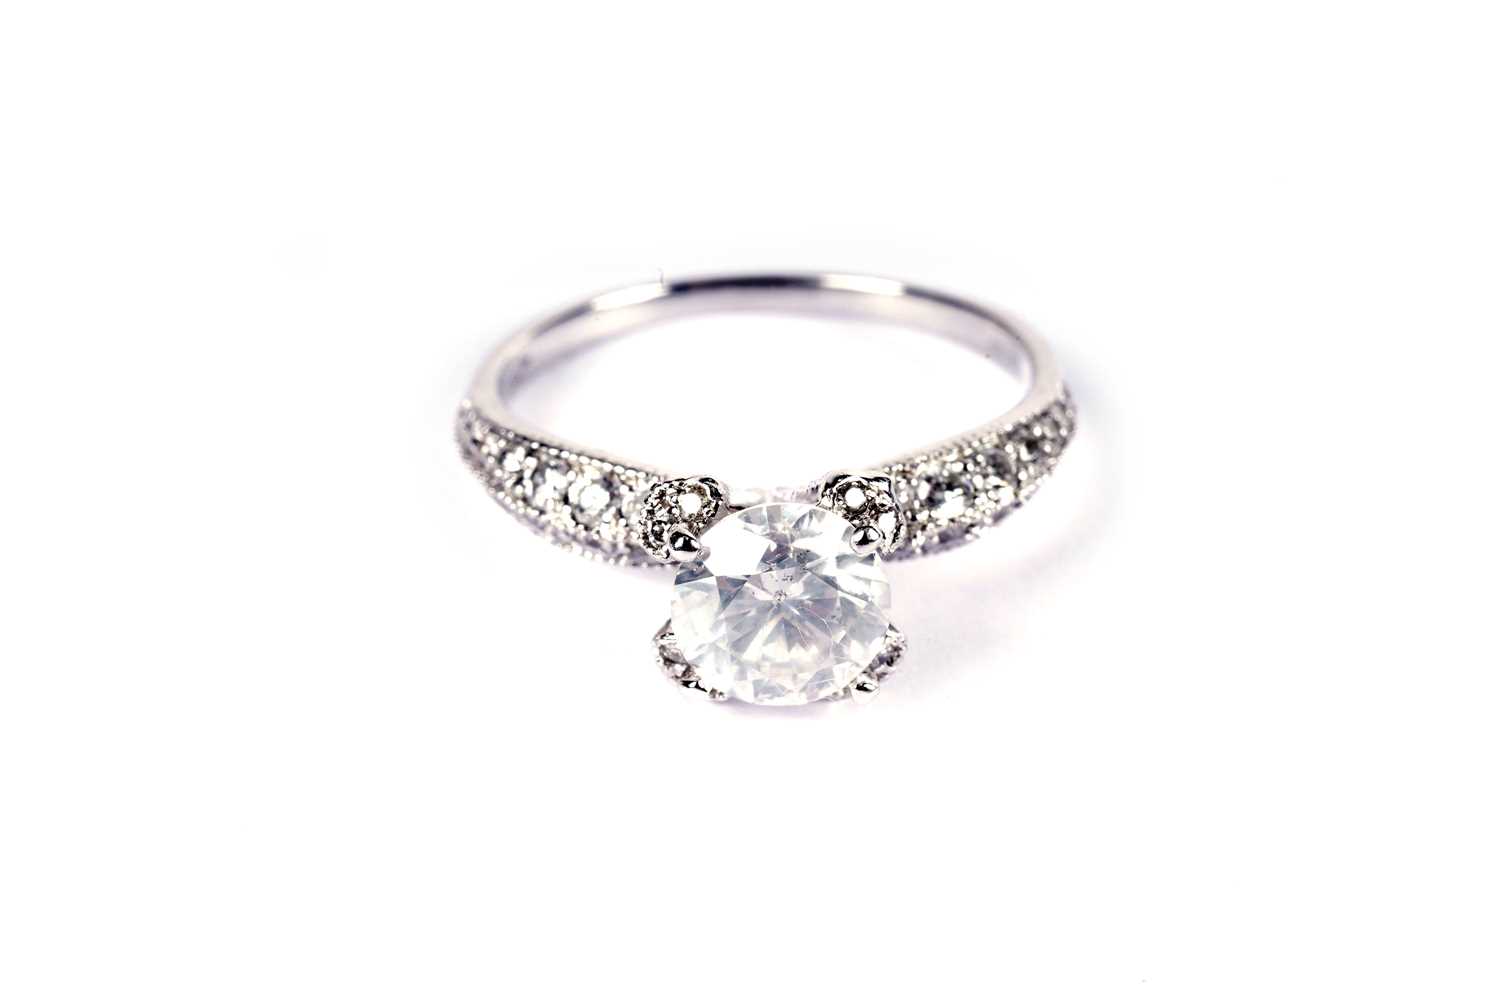 A solitaire diamond ring - Image 2 of 9